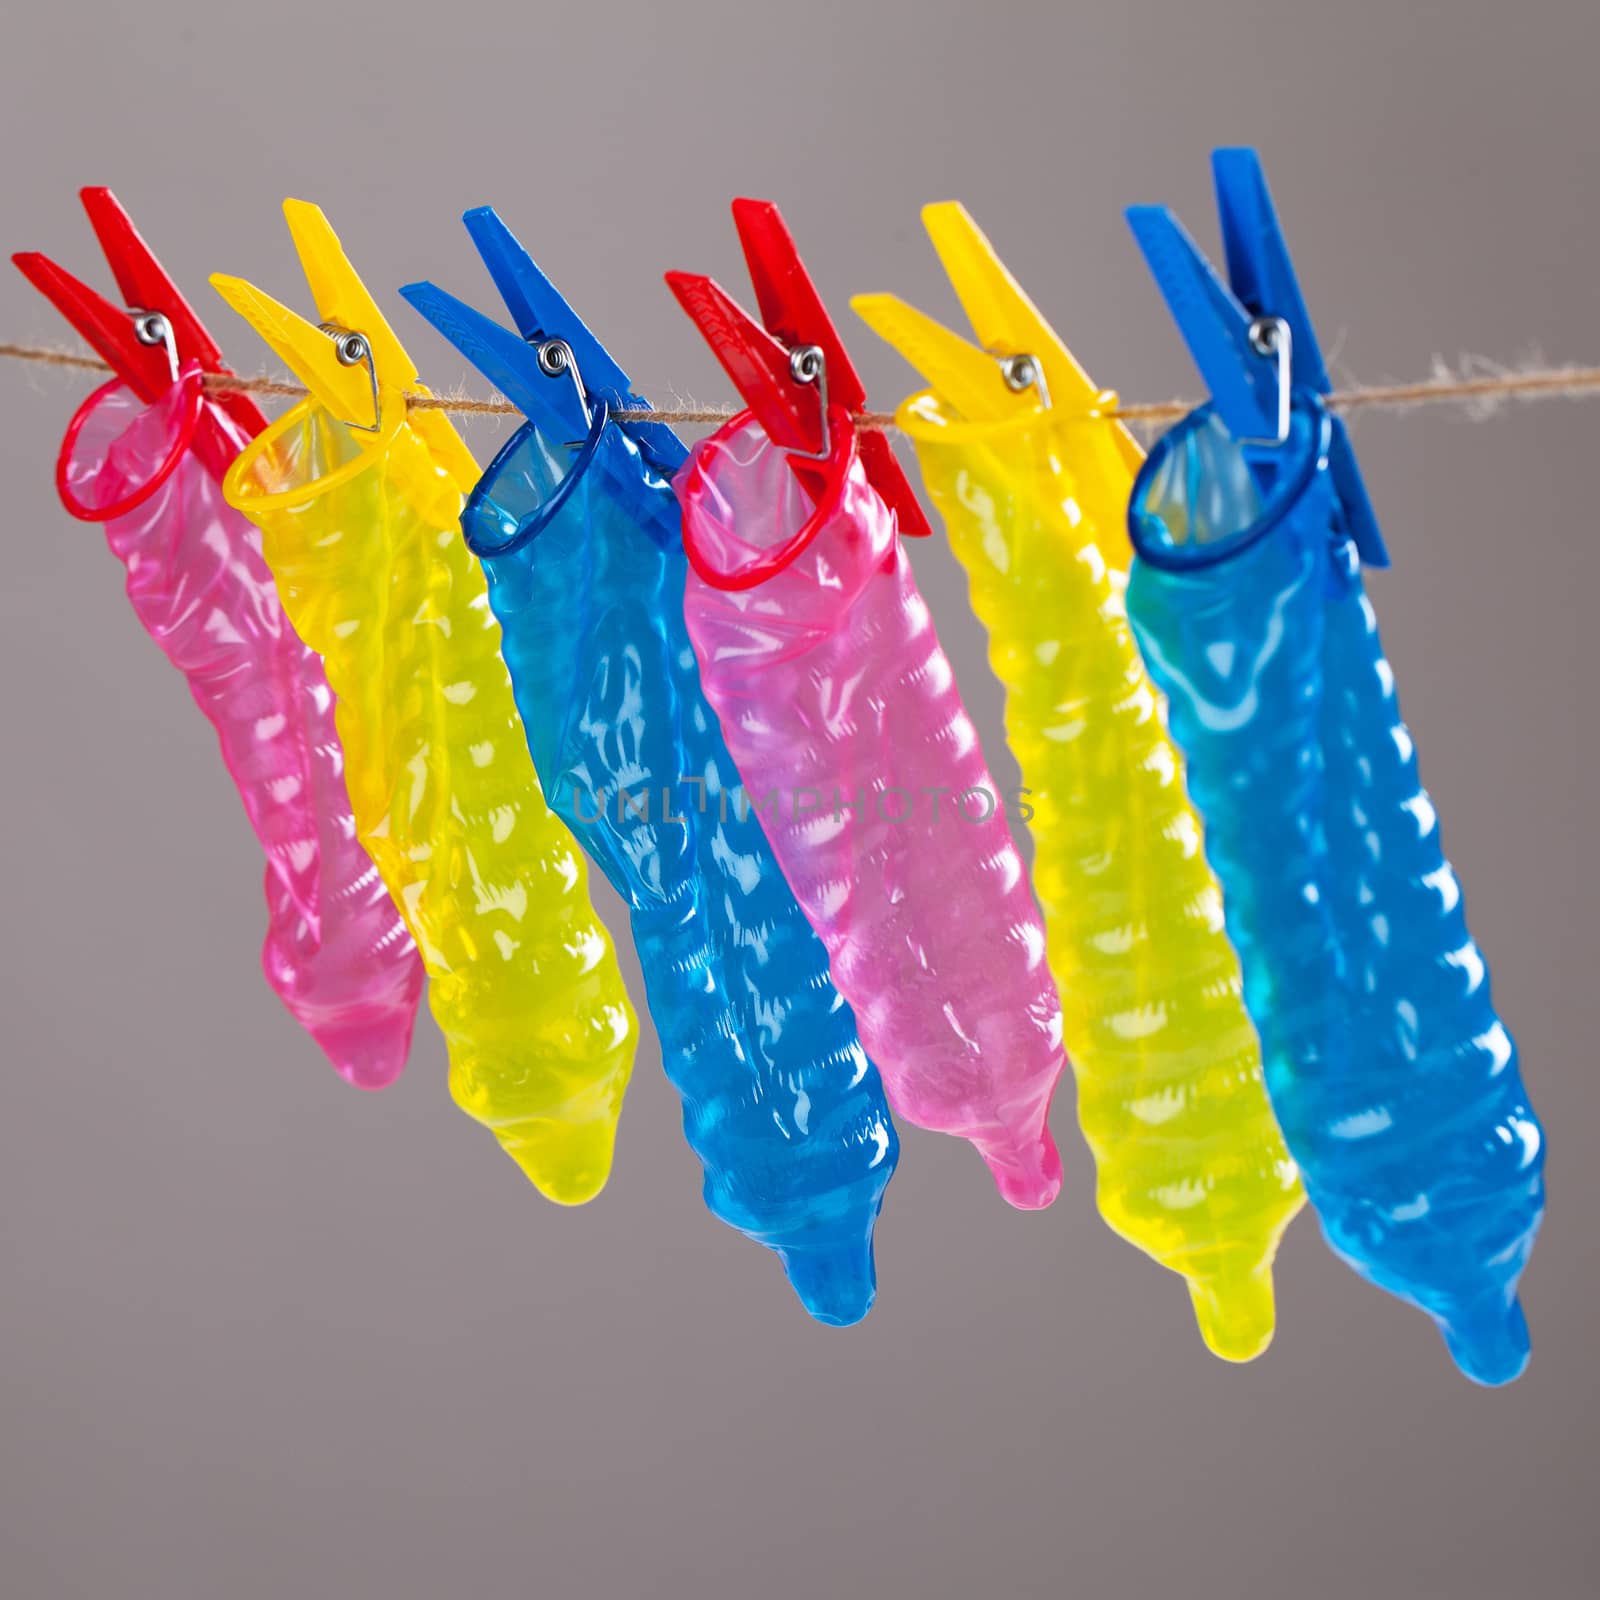 Colorful condoms with clothespins on a rope